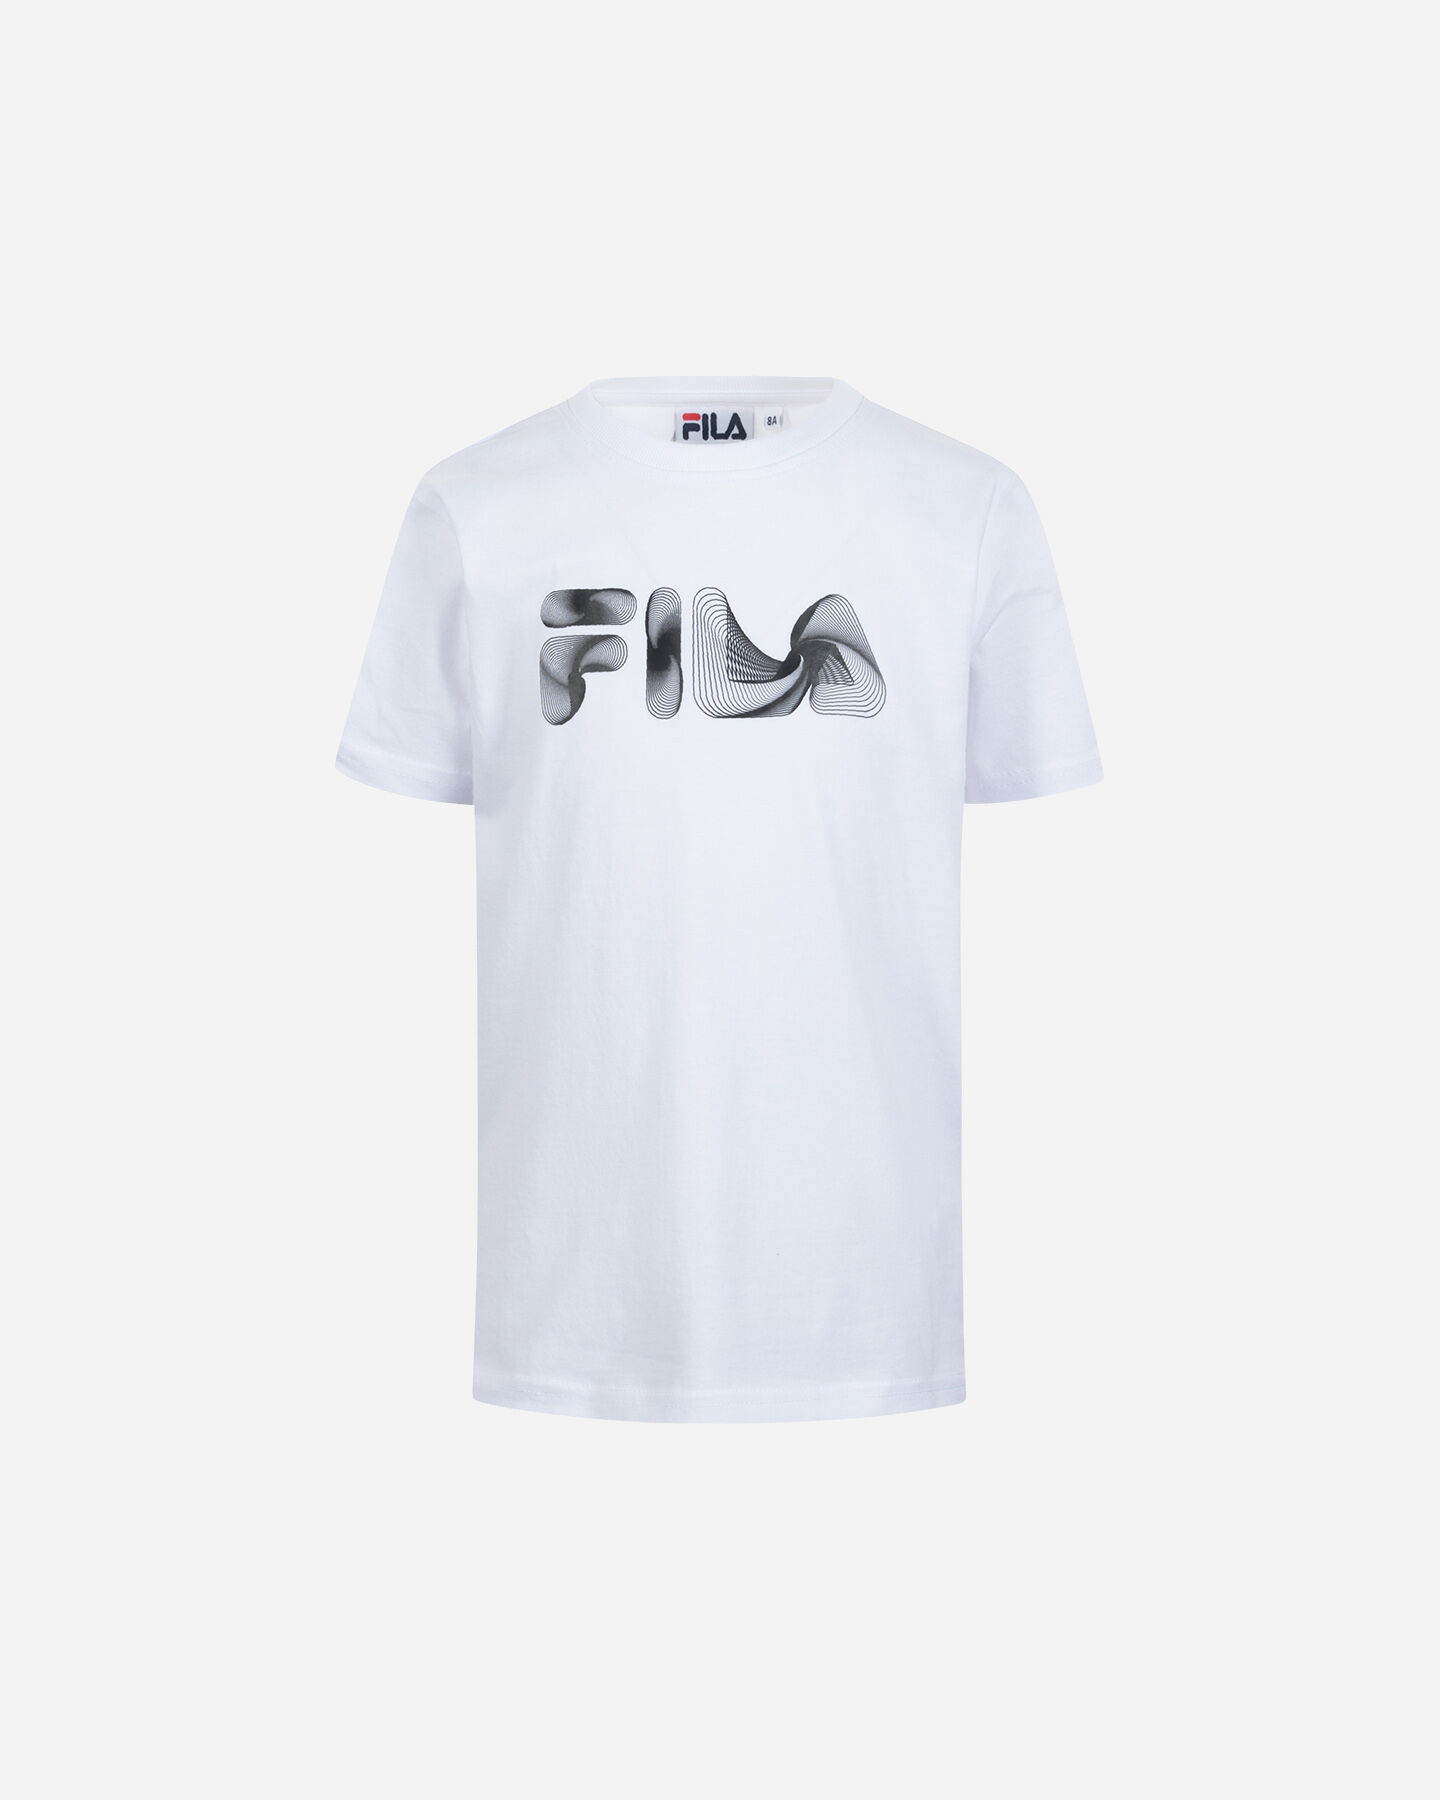  T-Shirt FILA FUNNY POP COLLECTION JR S4130059|001|6A scatto 0